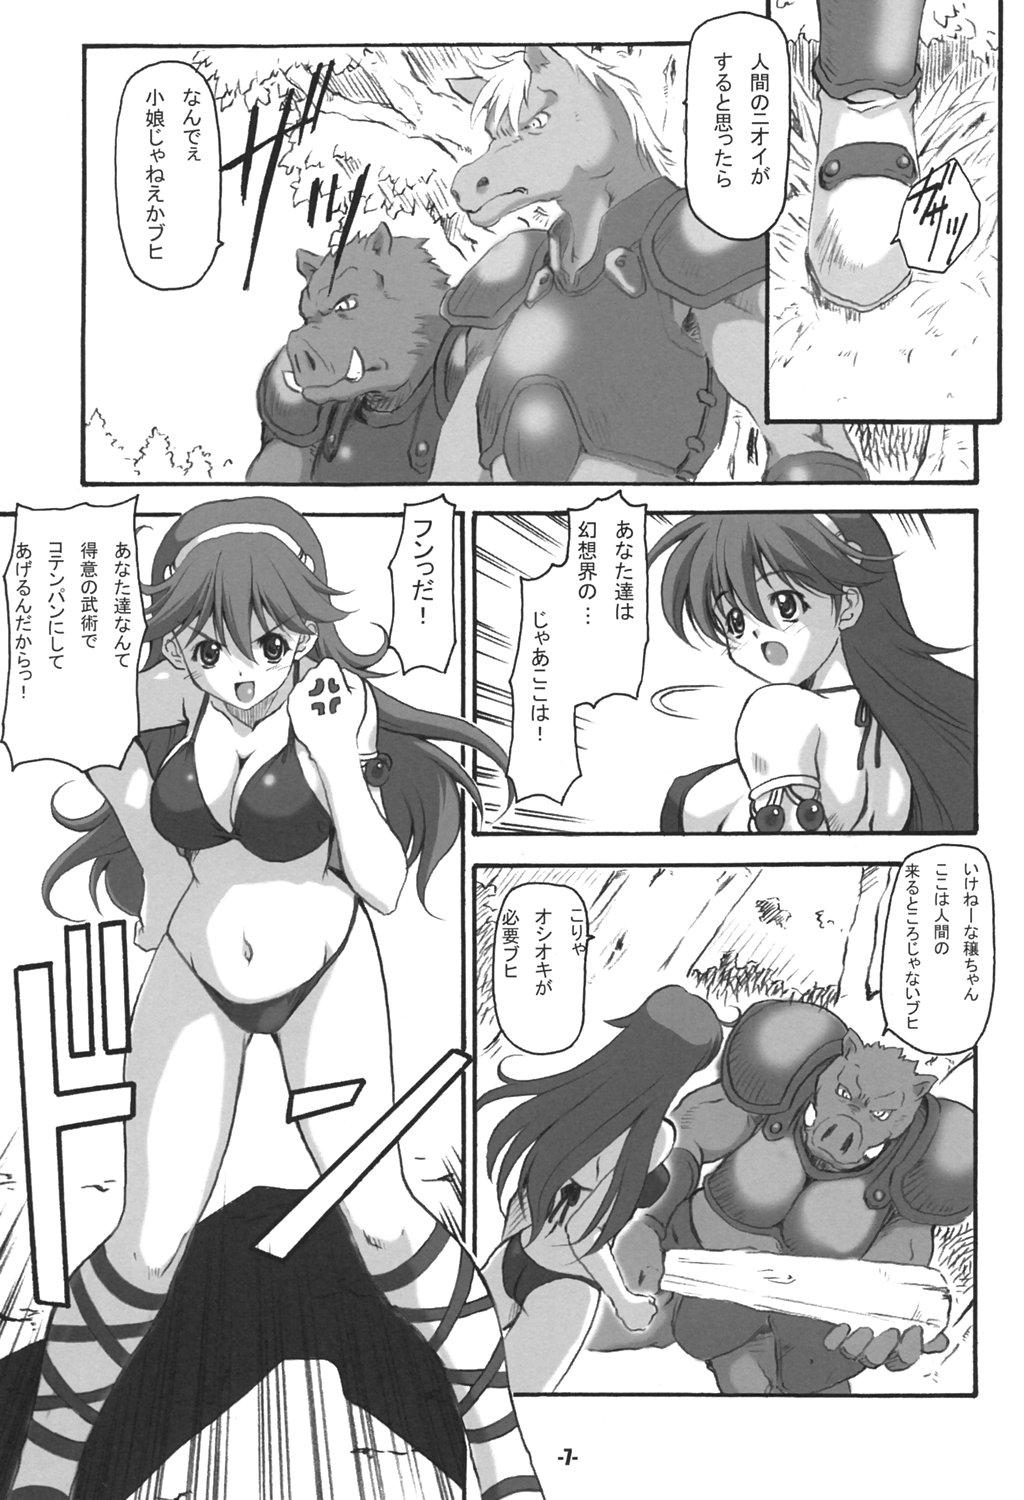 Van A's EXtra strage vol. 18 - King of fighters Gaygroupsex - Page 6